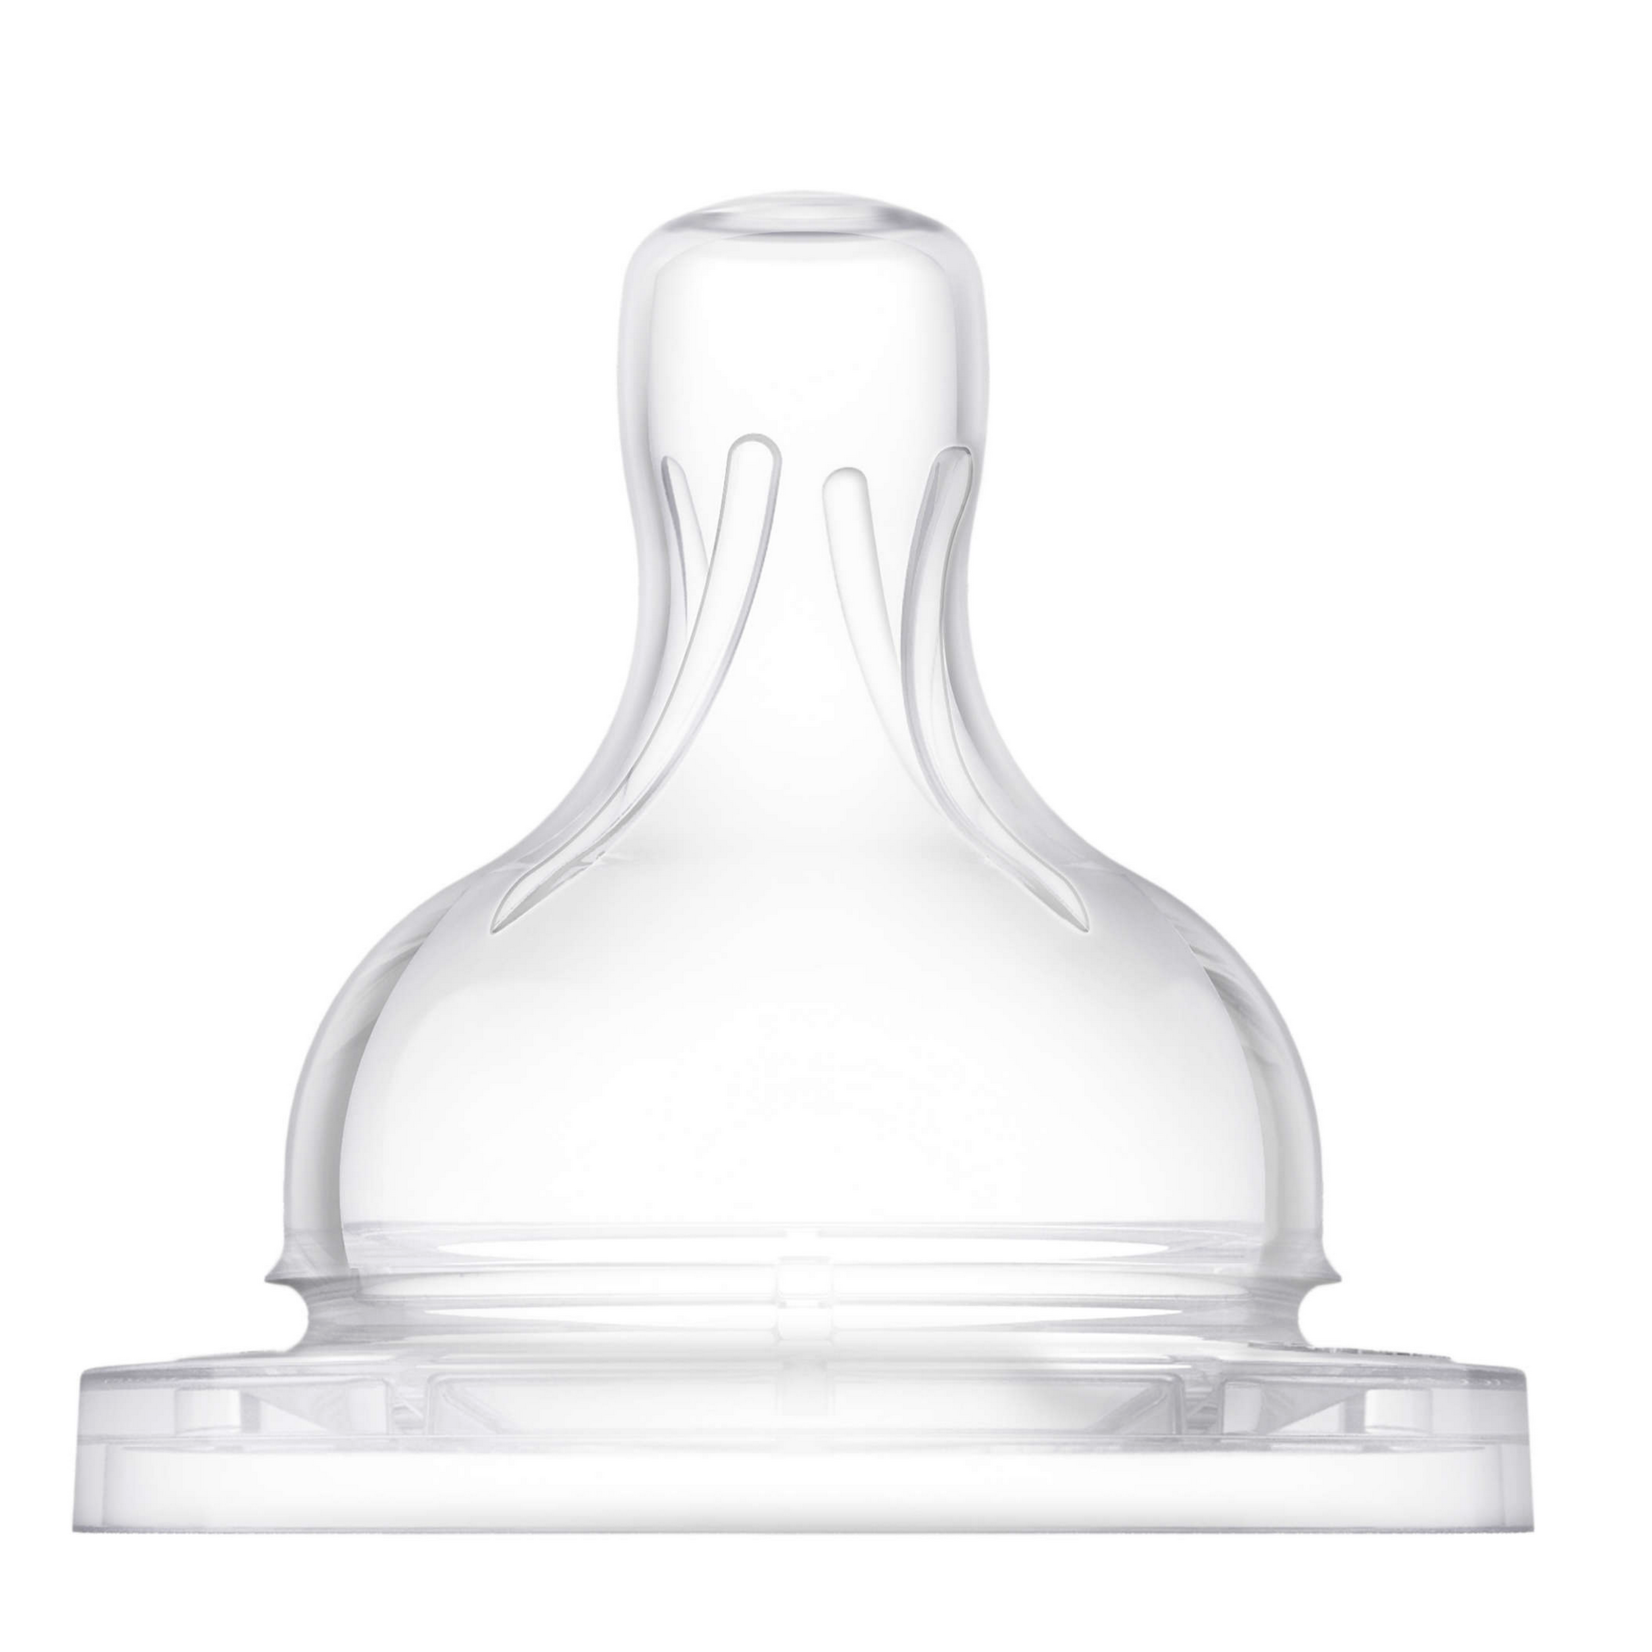 PHILIPS AVENT Anti-colic teat Silicone Teat Twin Pk Fast Flow 6m+(scf634/27)